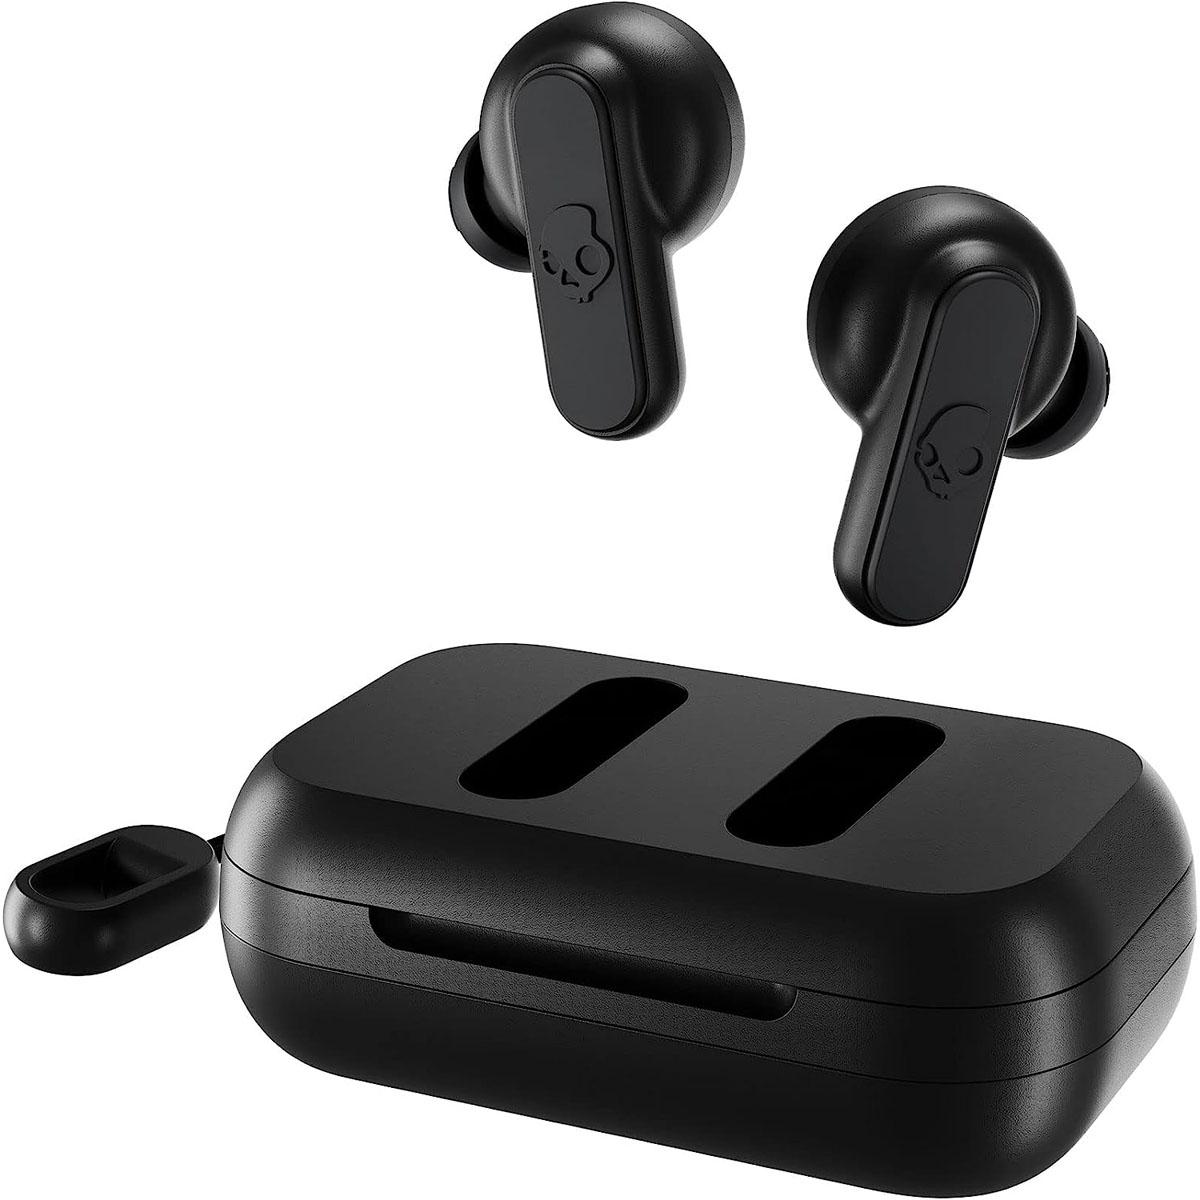 Skullcandy DIME XT2 True Wireless Earbuds Refurbished for $5.35 Shipped